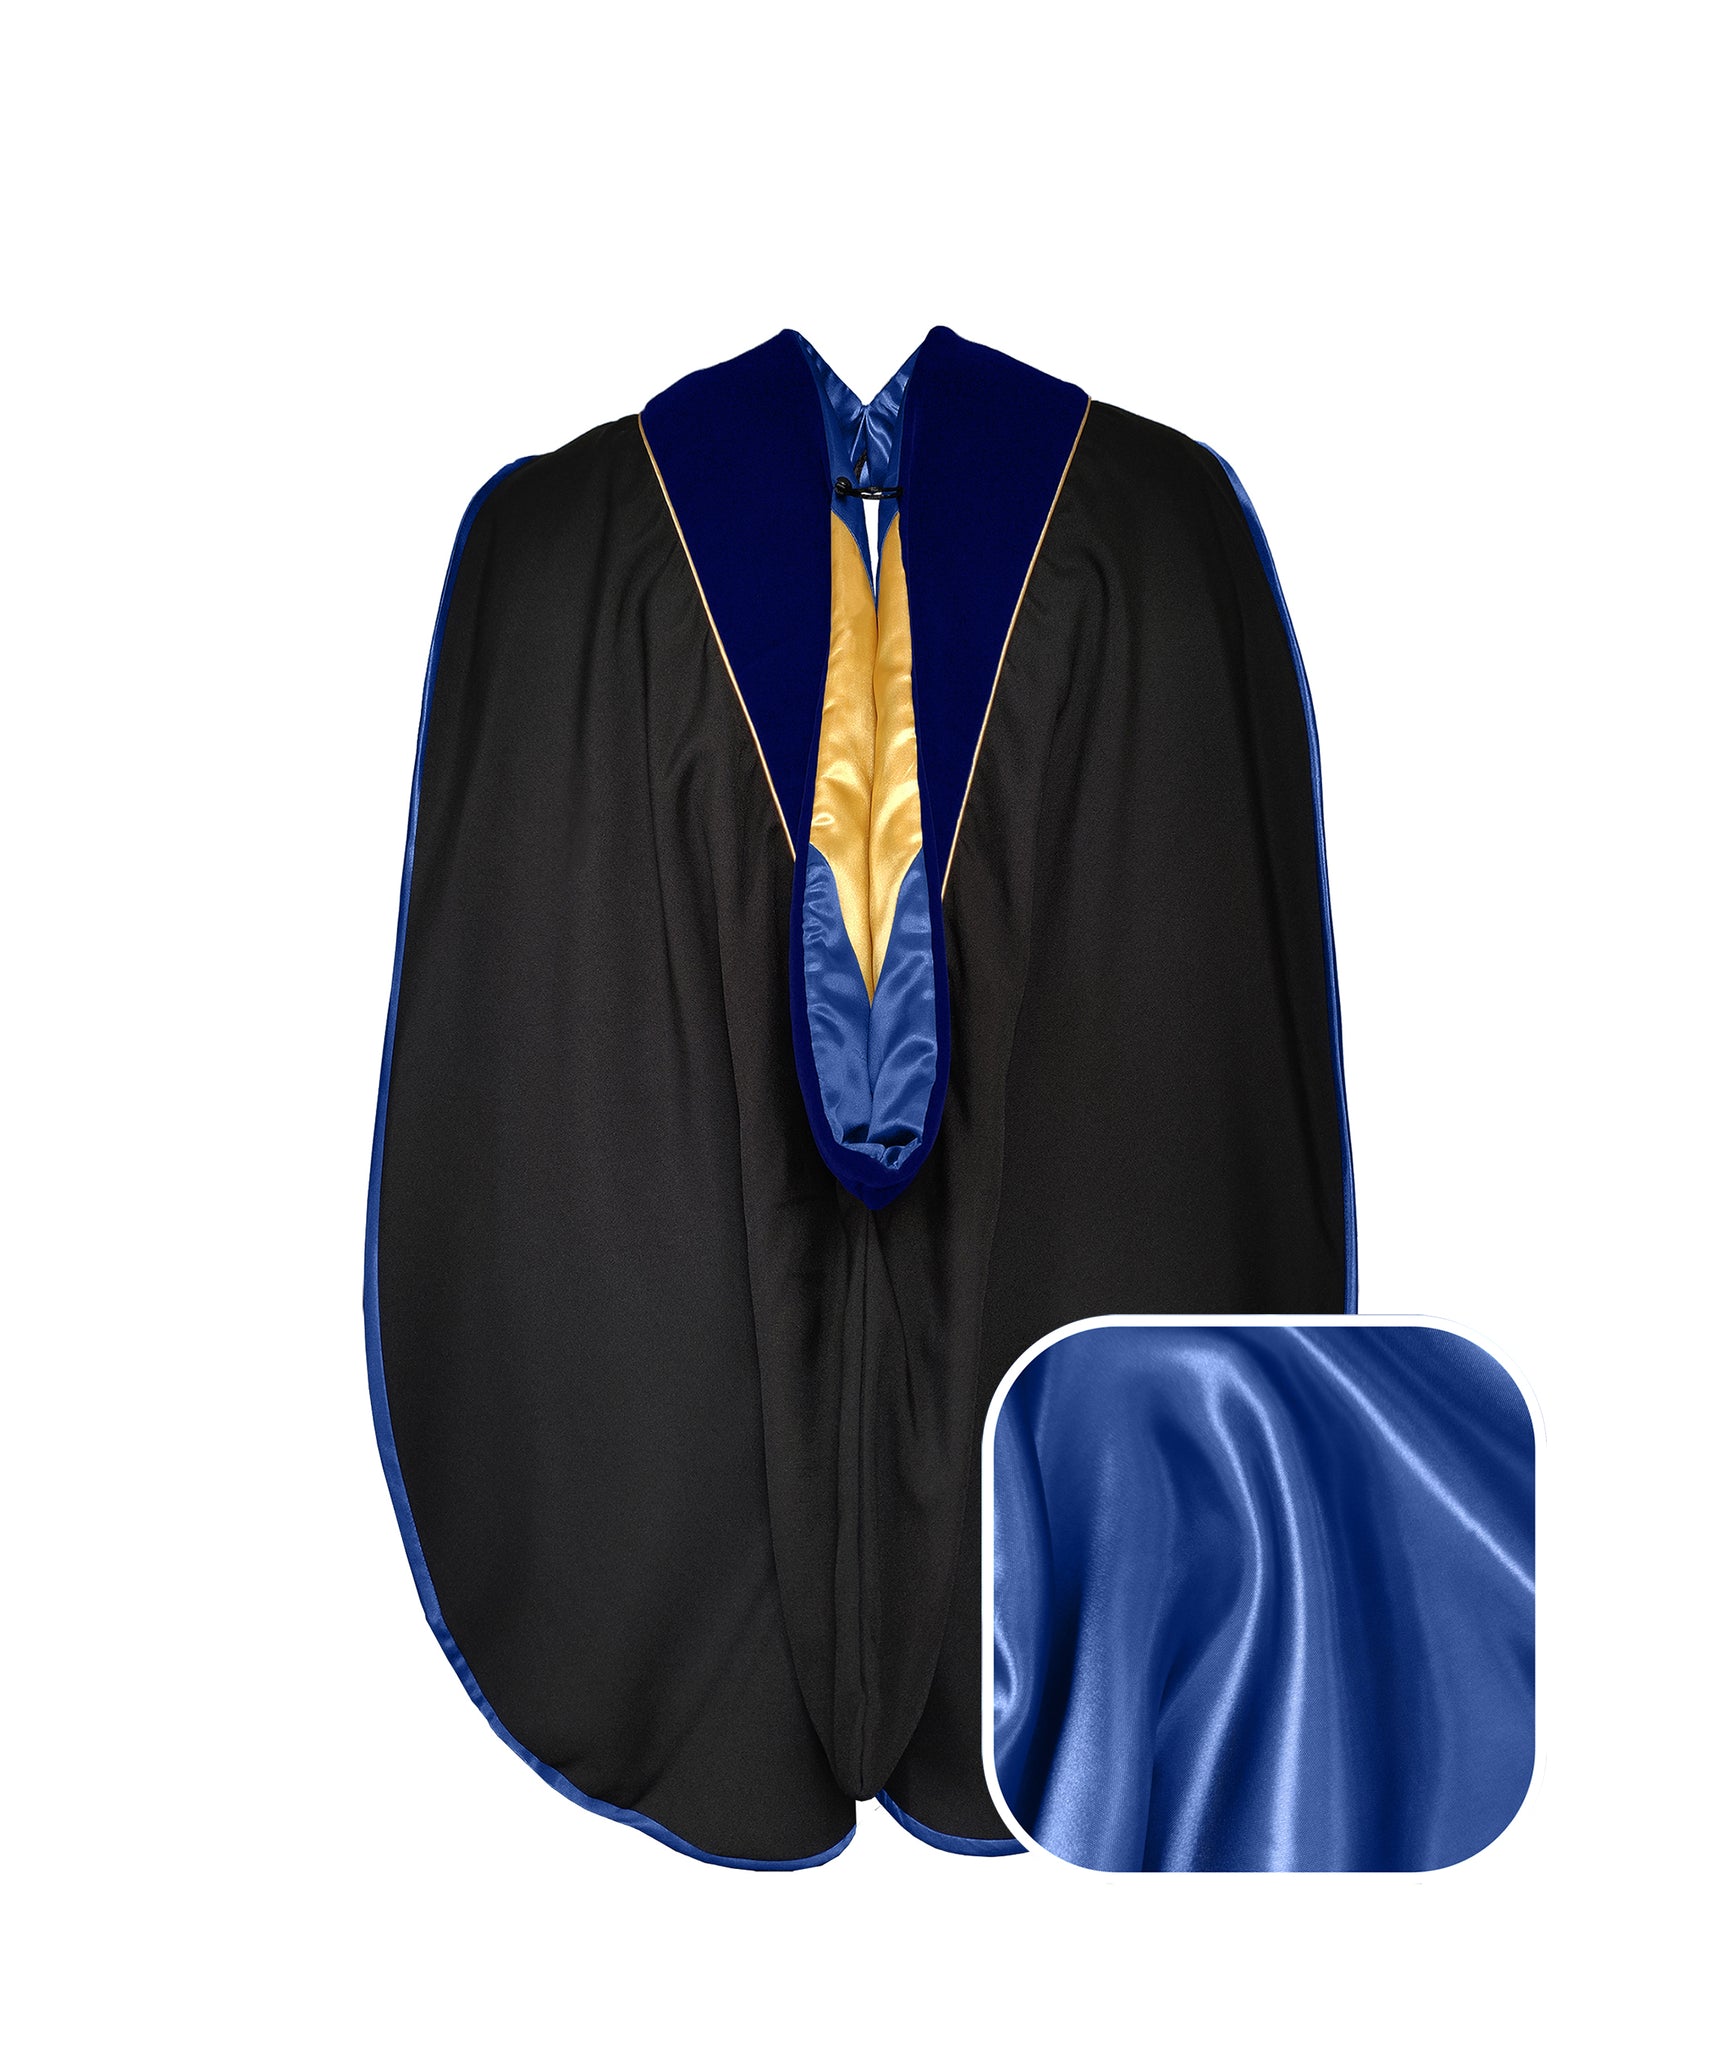 TngHui Deluxe Doctoral Graduation Gown Doctoral Hood and Tam 8 Sided  Package | Graduation gown, Graduation robes, Doctoral gown